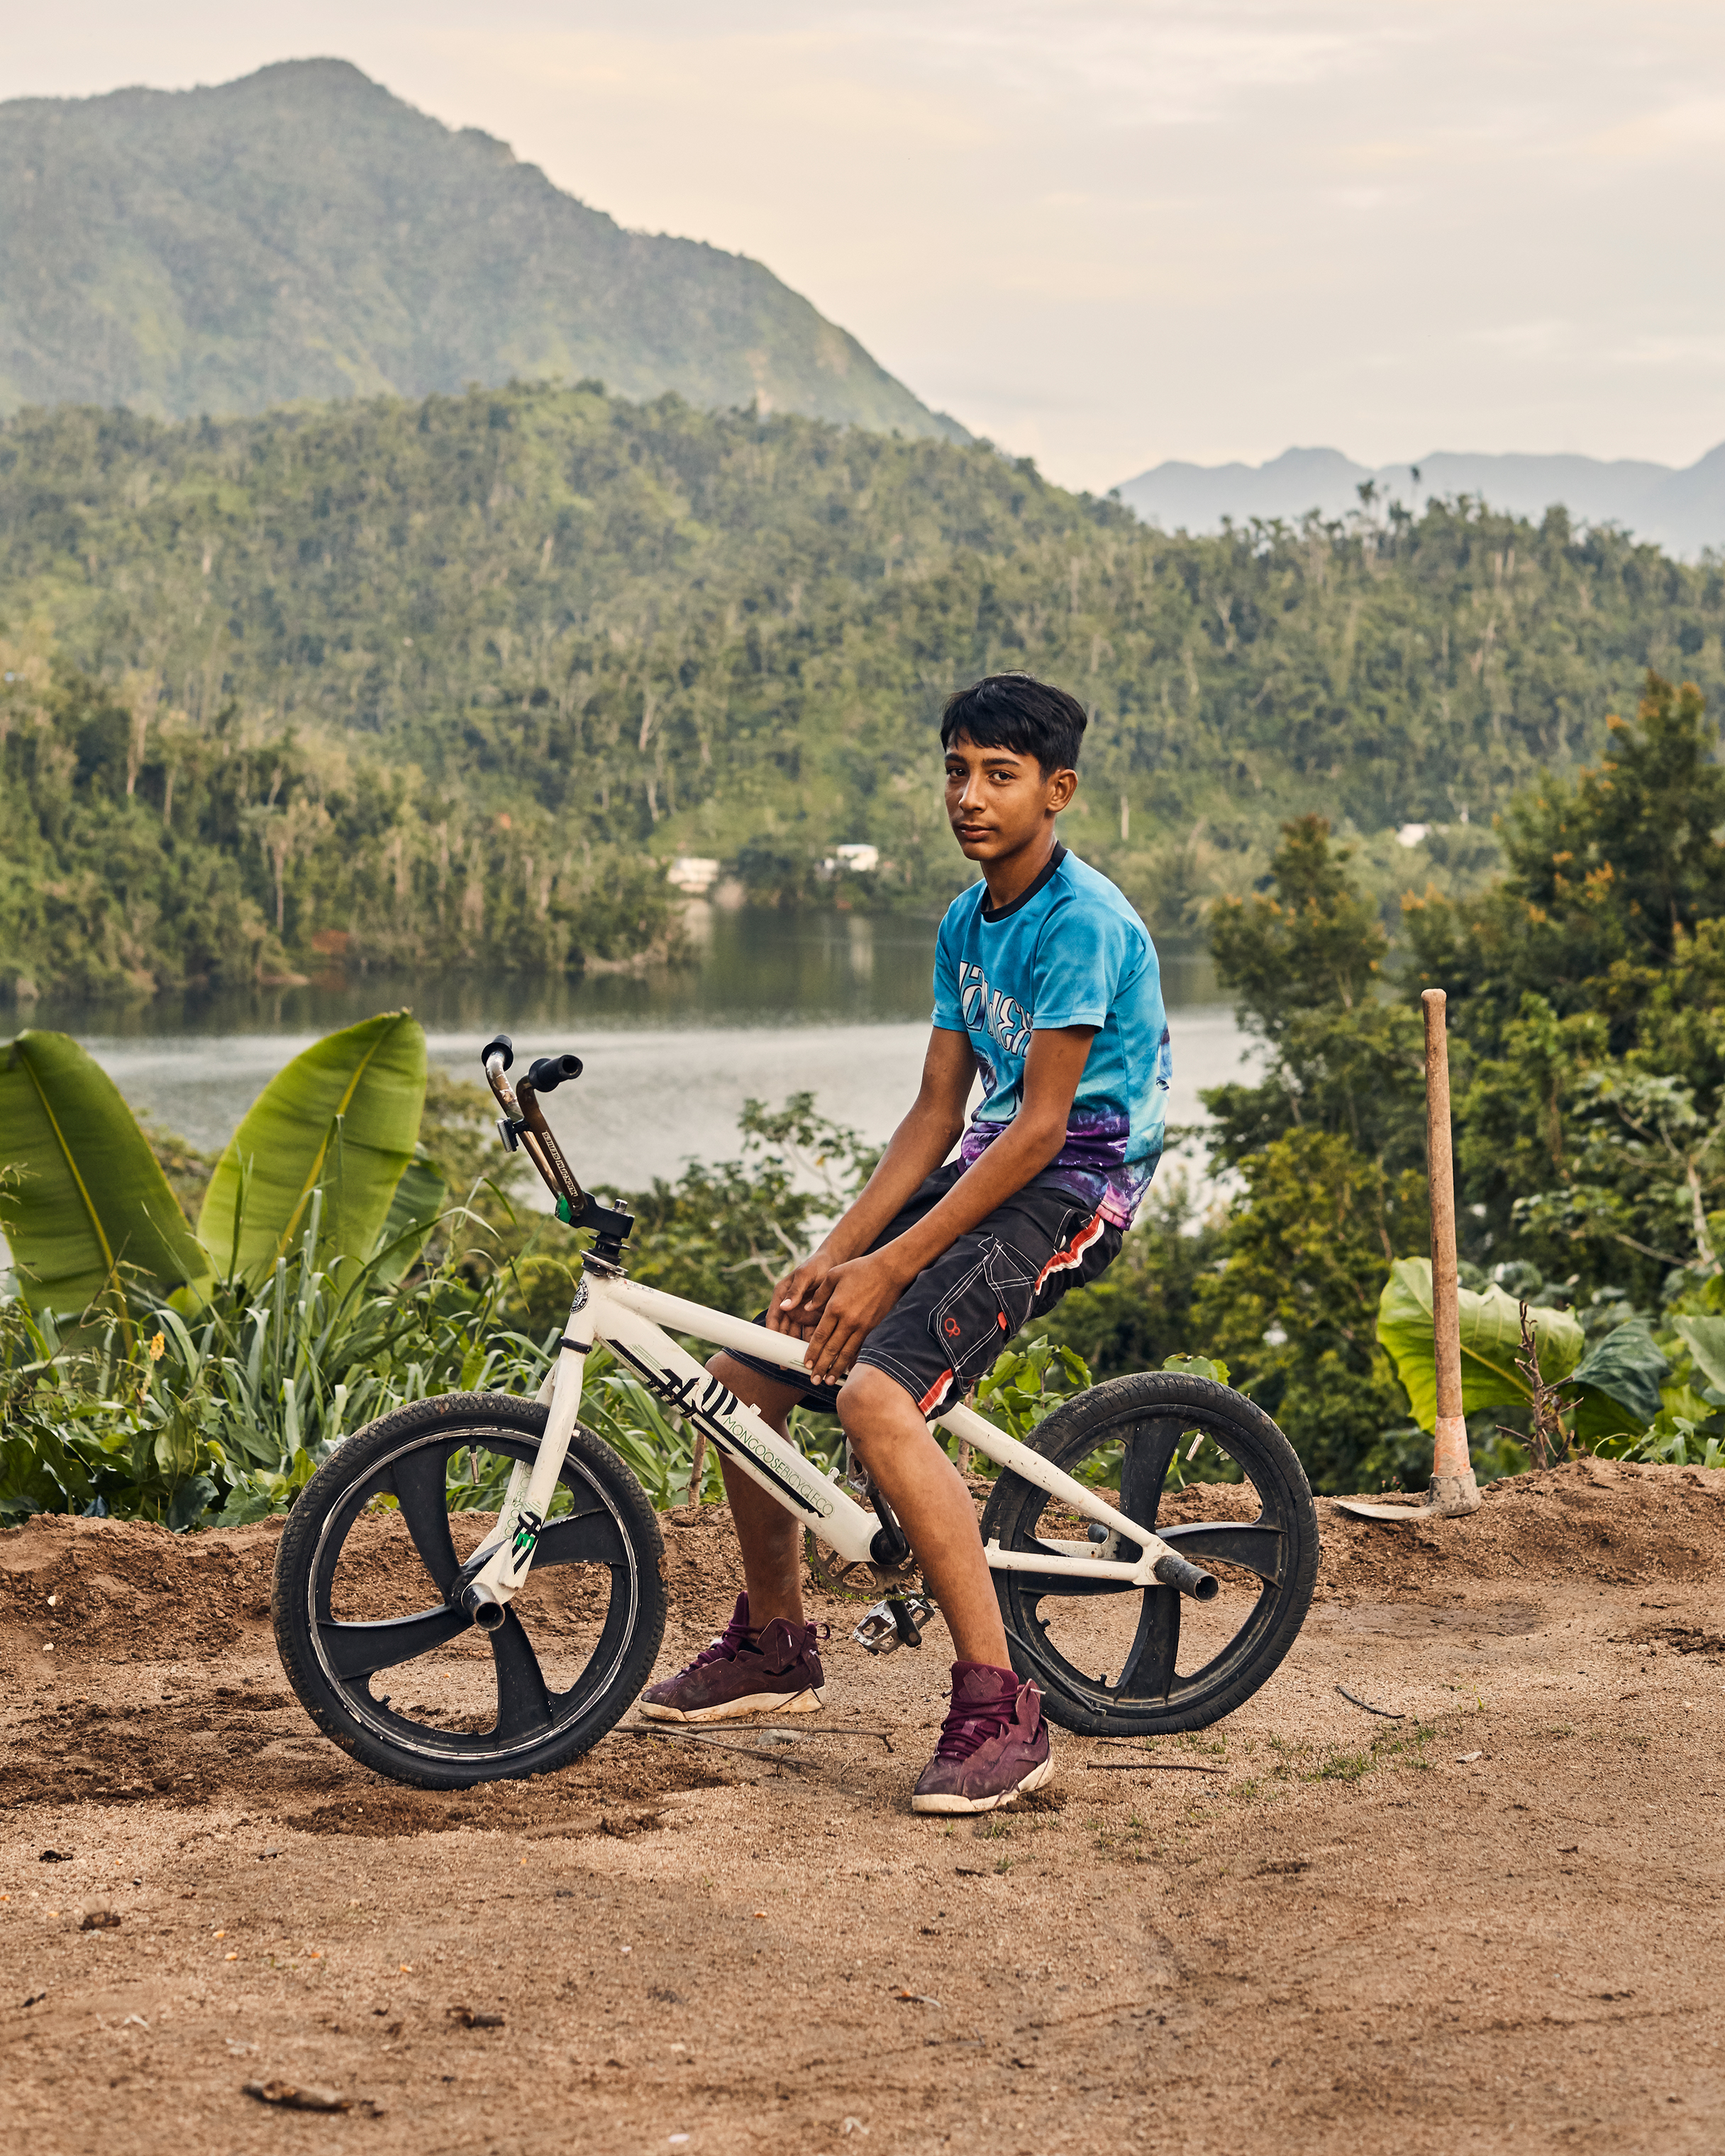 Kaleb Acevedo poses on the bicycle he got after the storm. (Christopher Gregory for TIME)